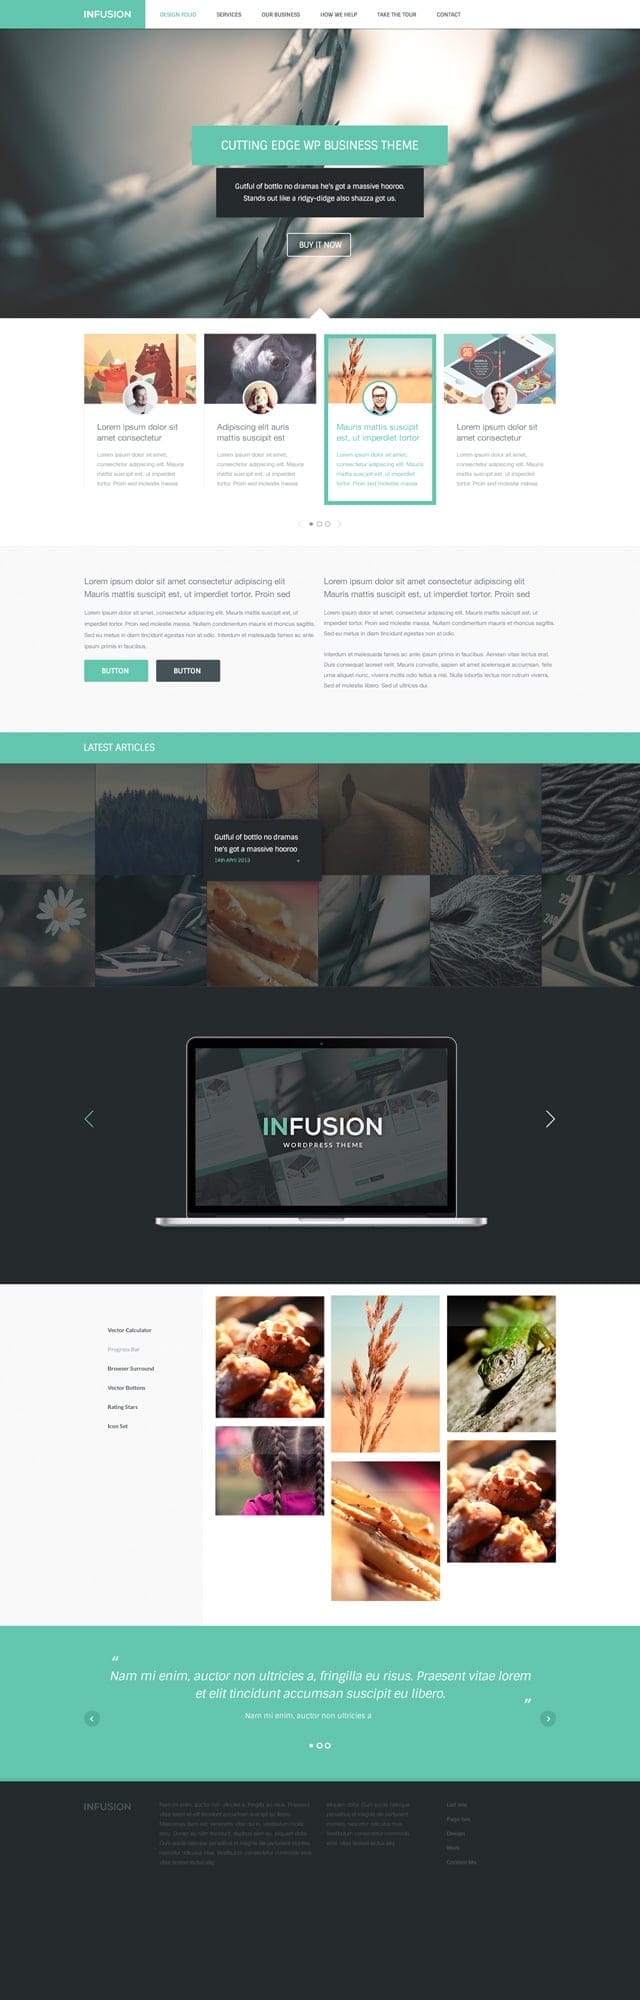 Infusion Free website template